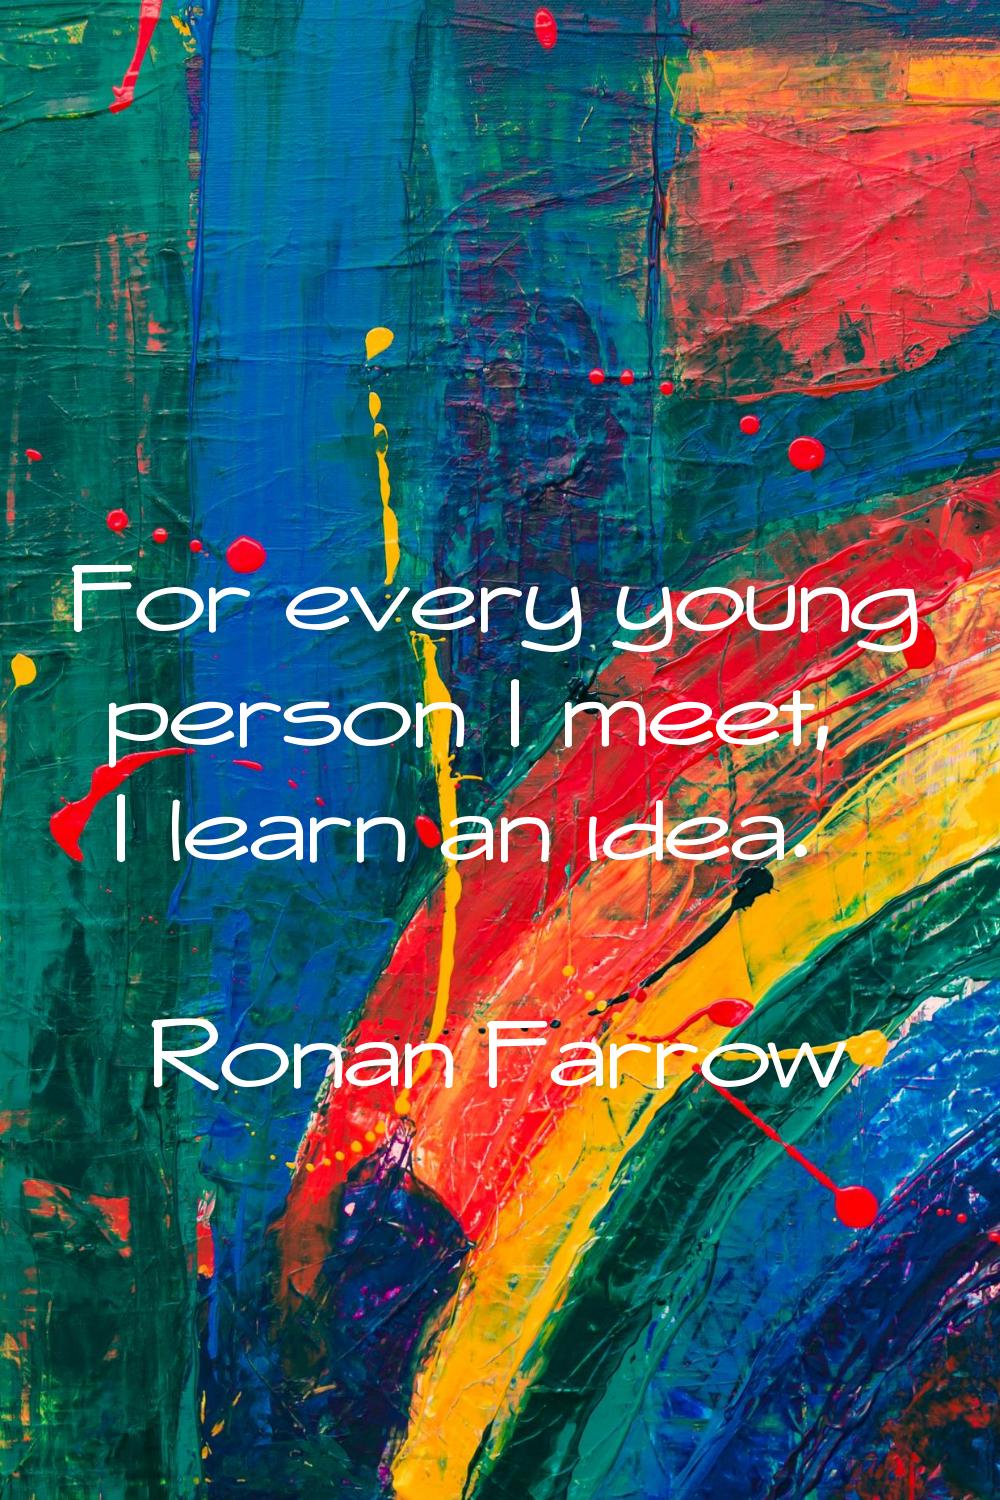 For every young person I meet, I learn an idea.